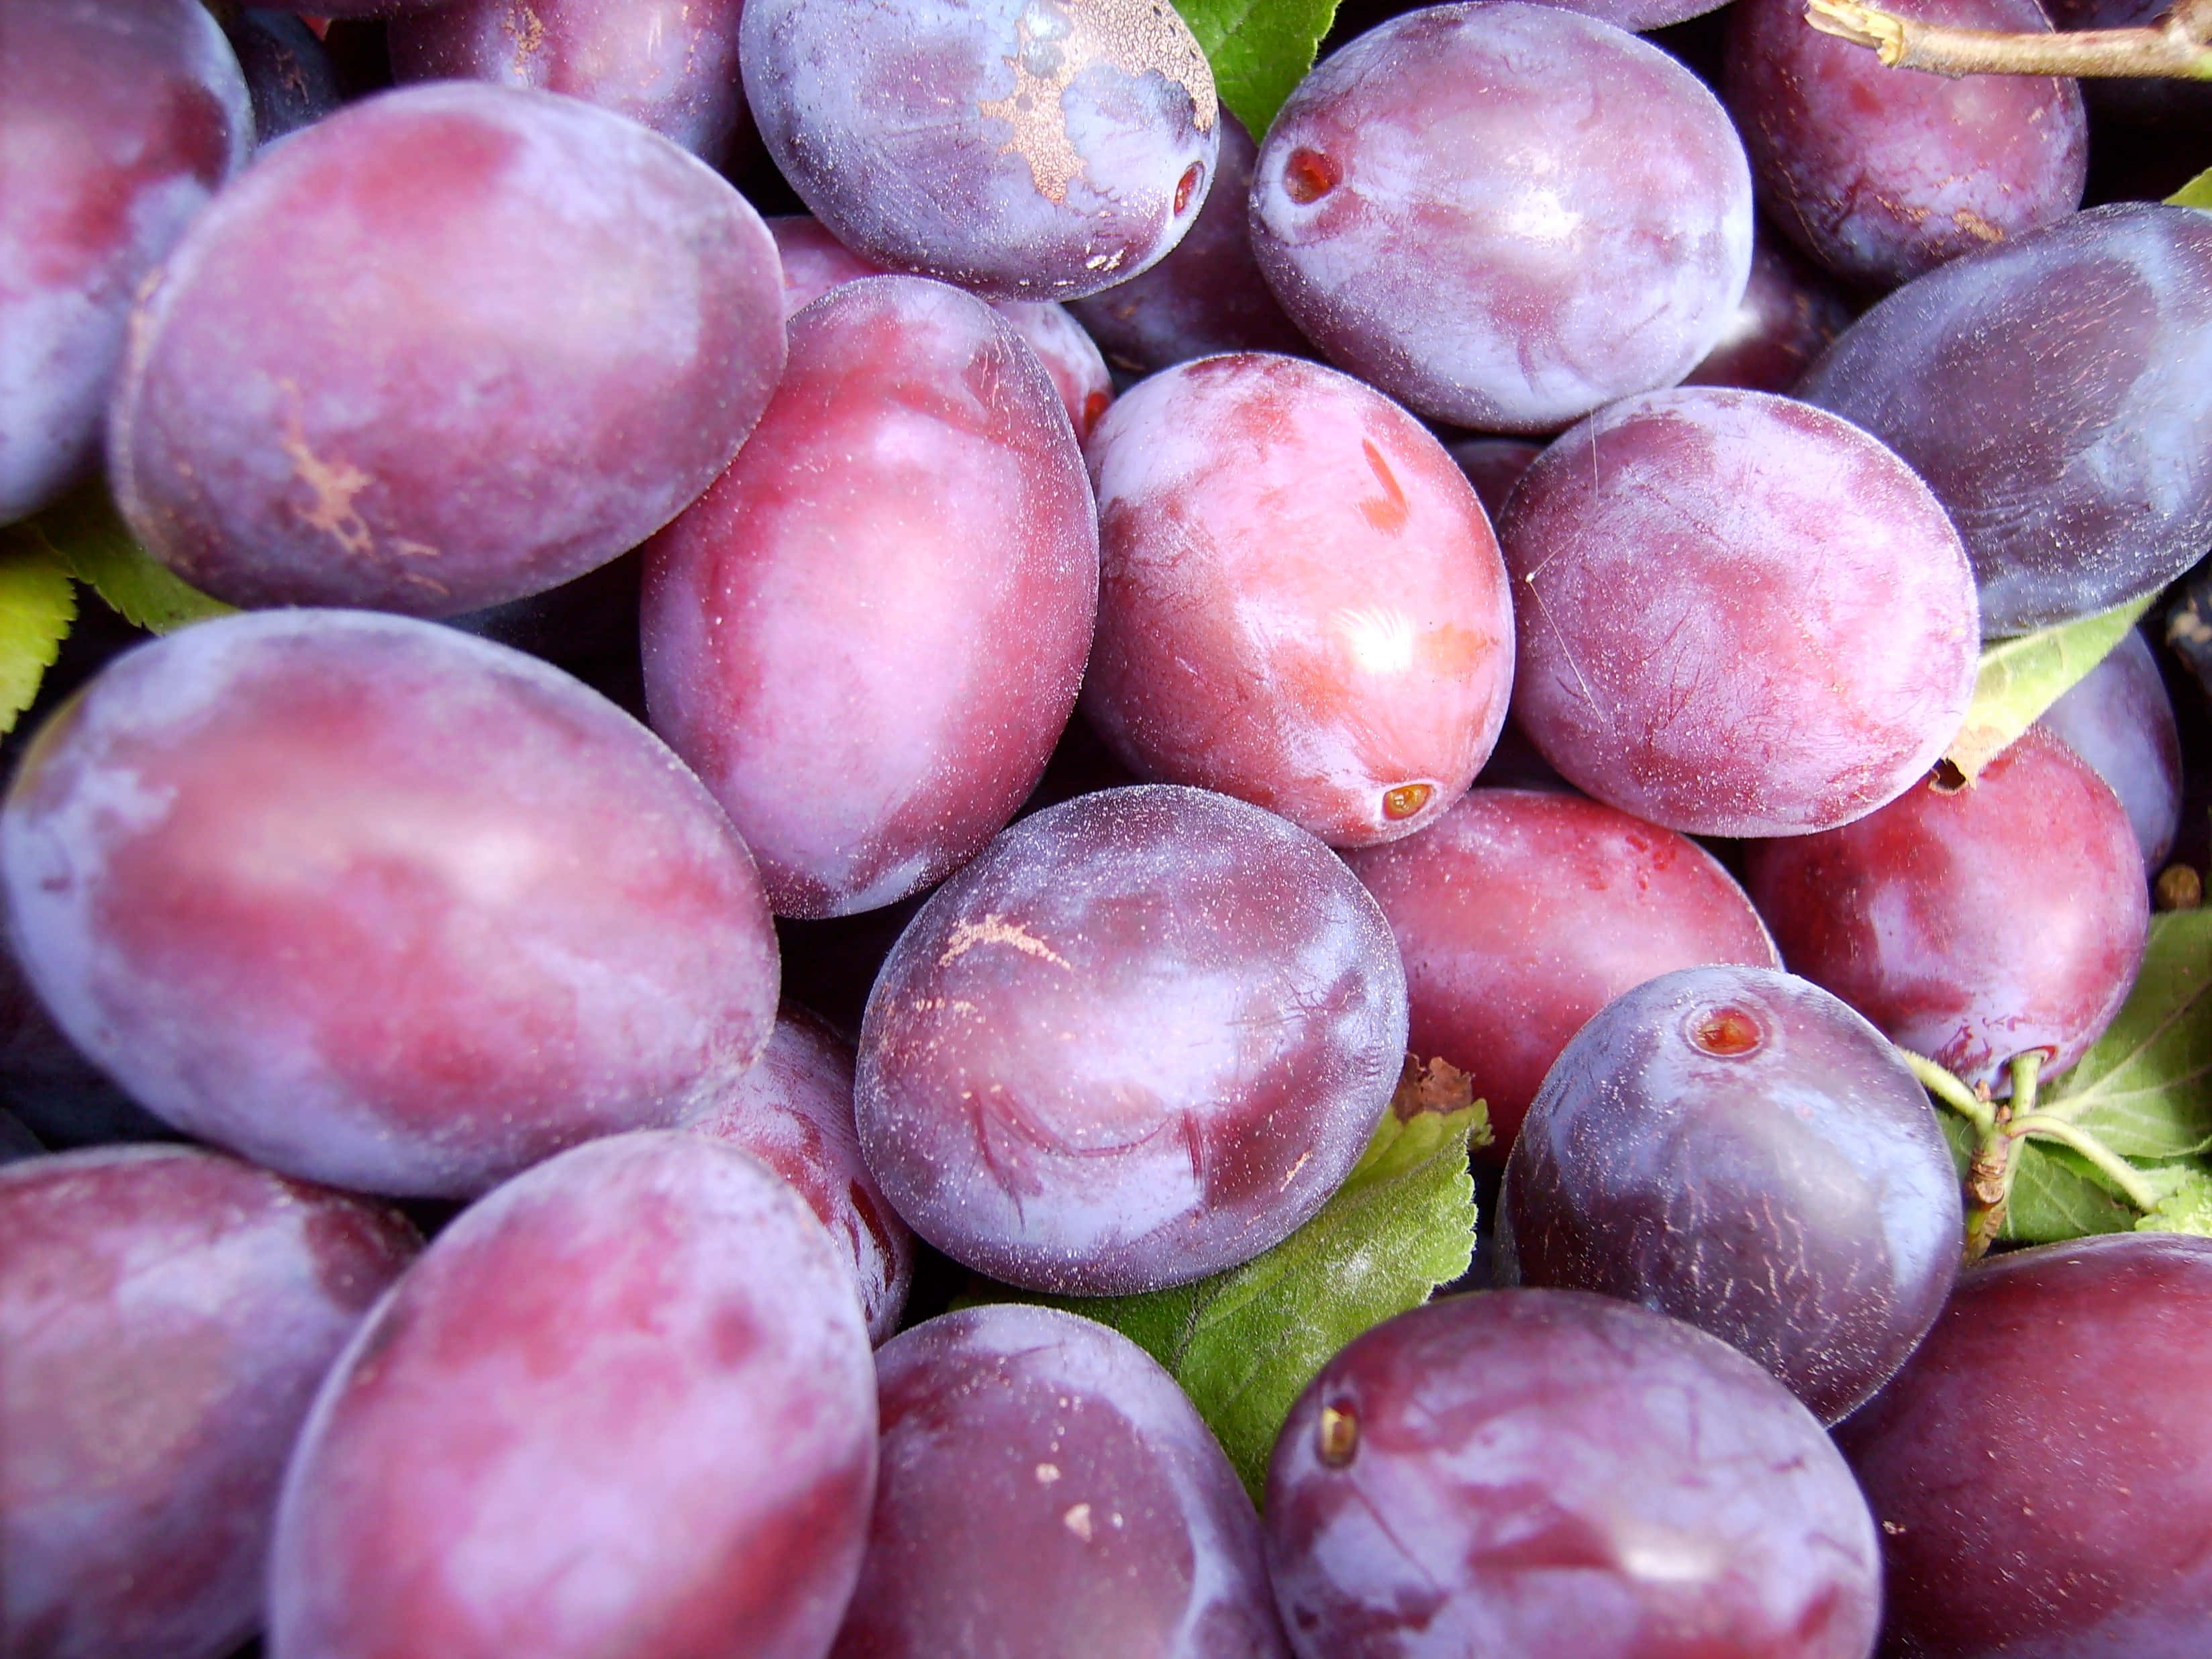 Freshly-picked purple plums, ready to be enjoyed. Wallpaper